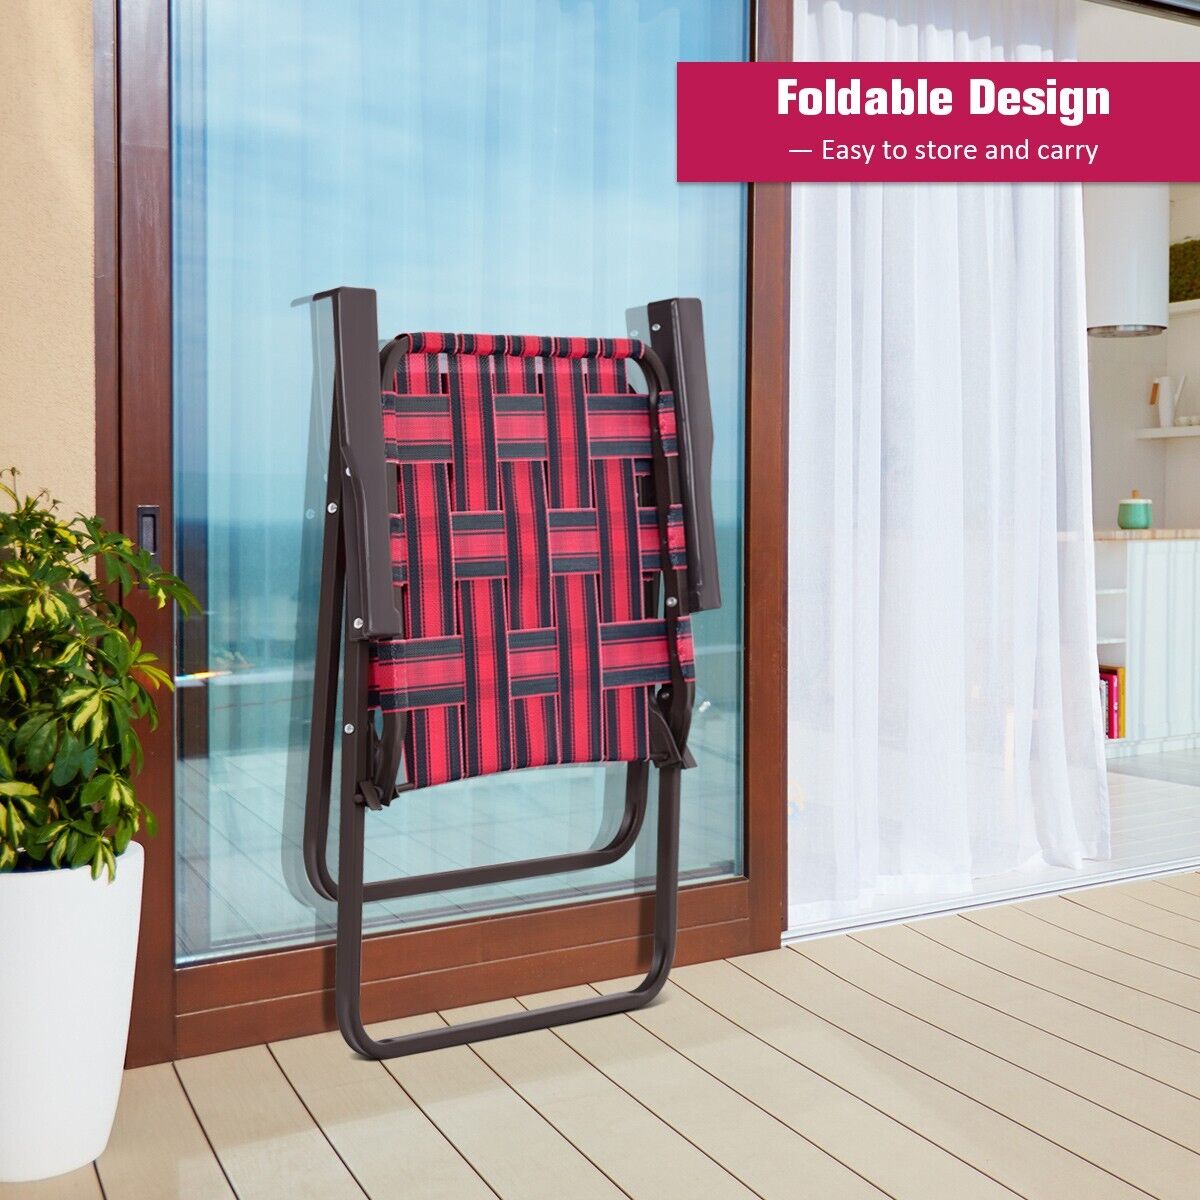 6 Pieces Folding Beach Chair with Armrest in U Shaped Steel Frame-Red